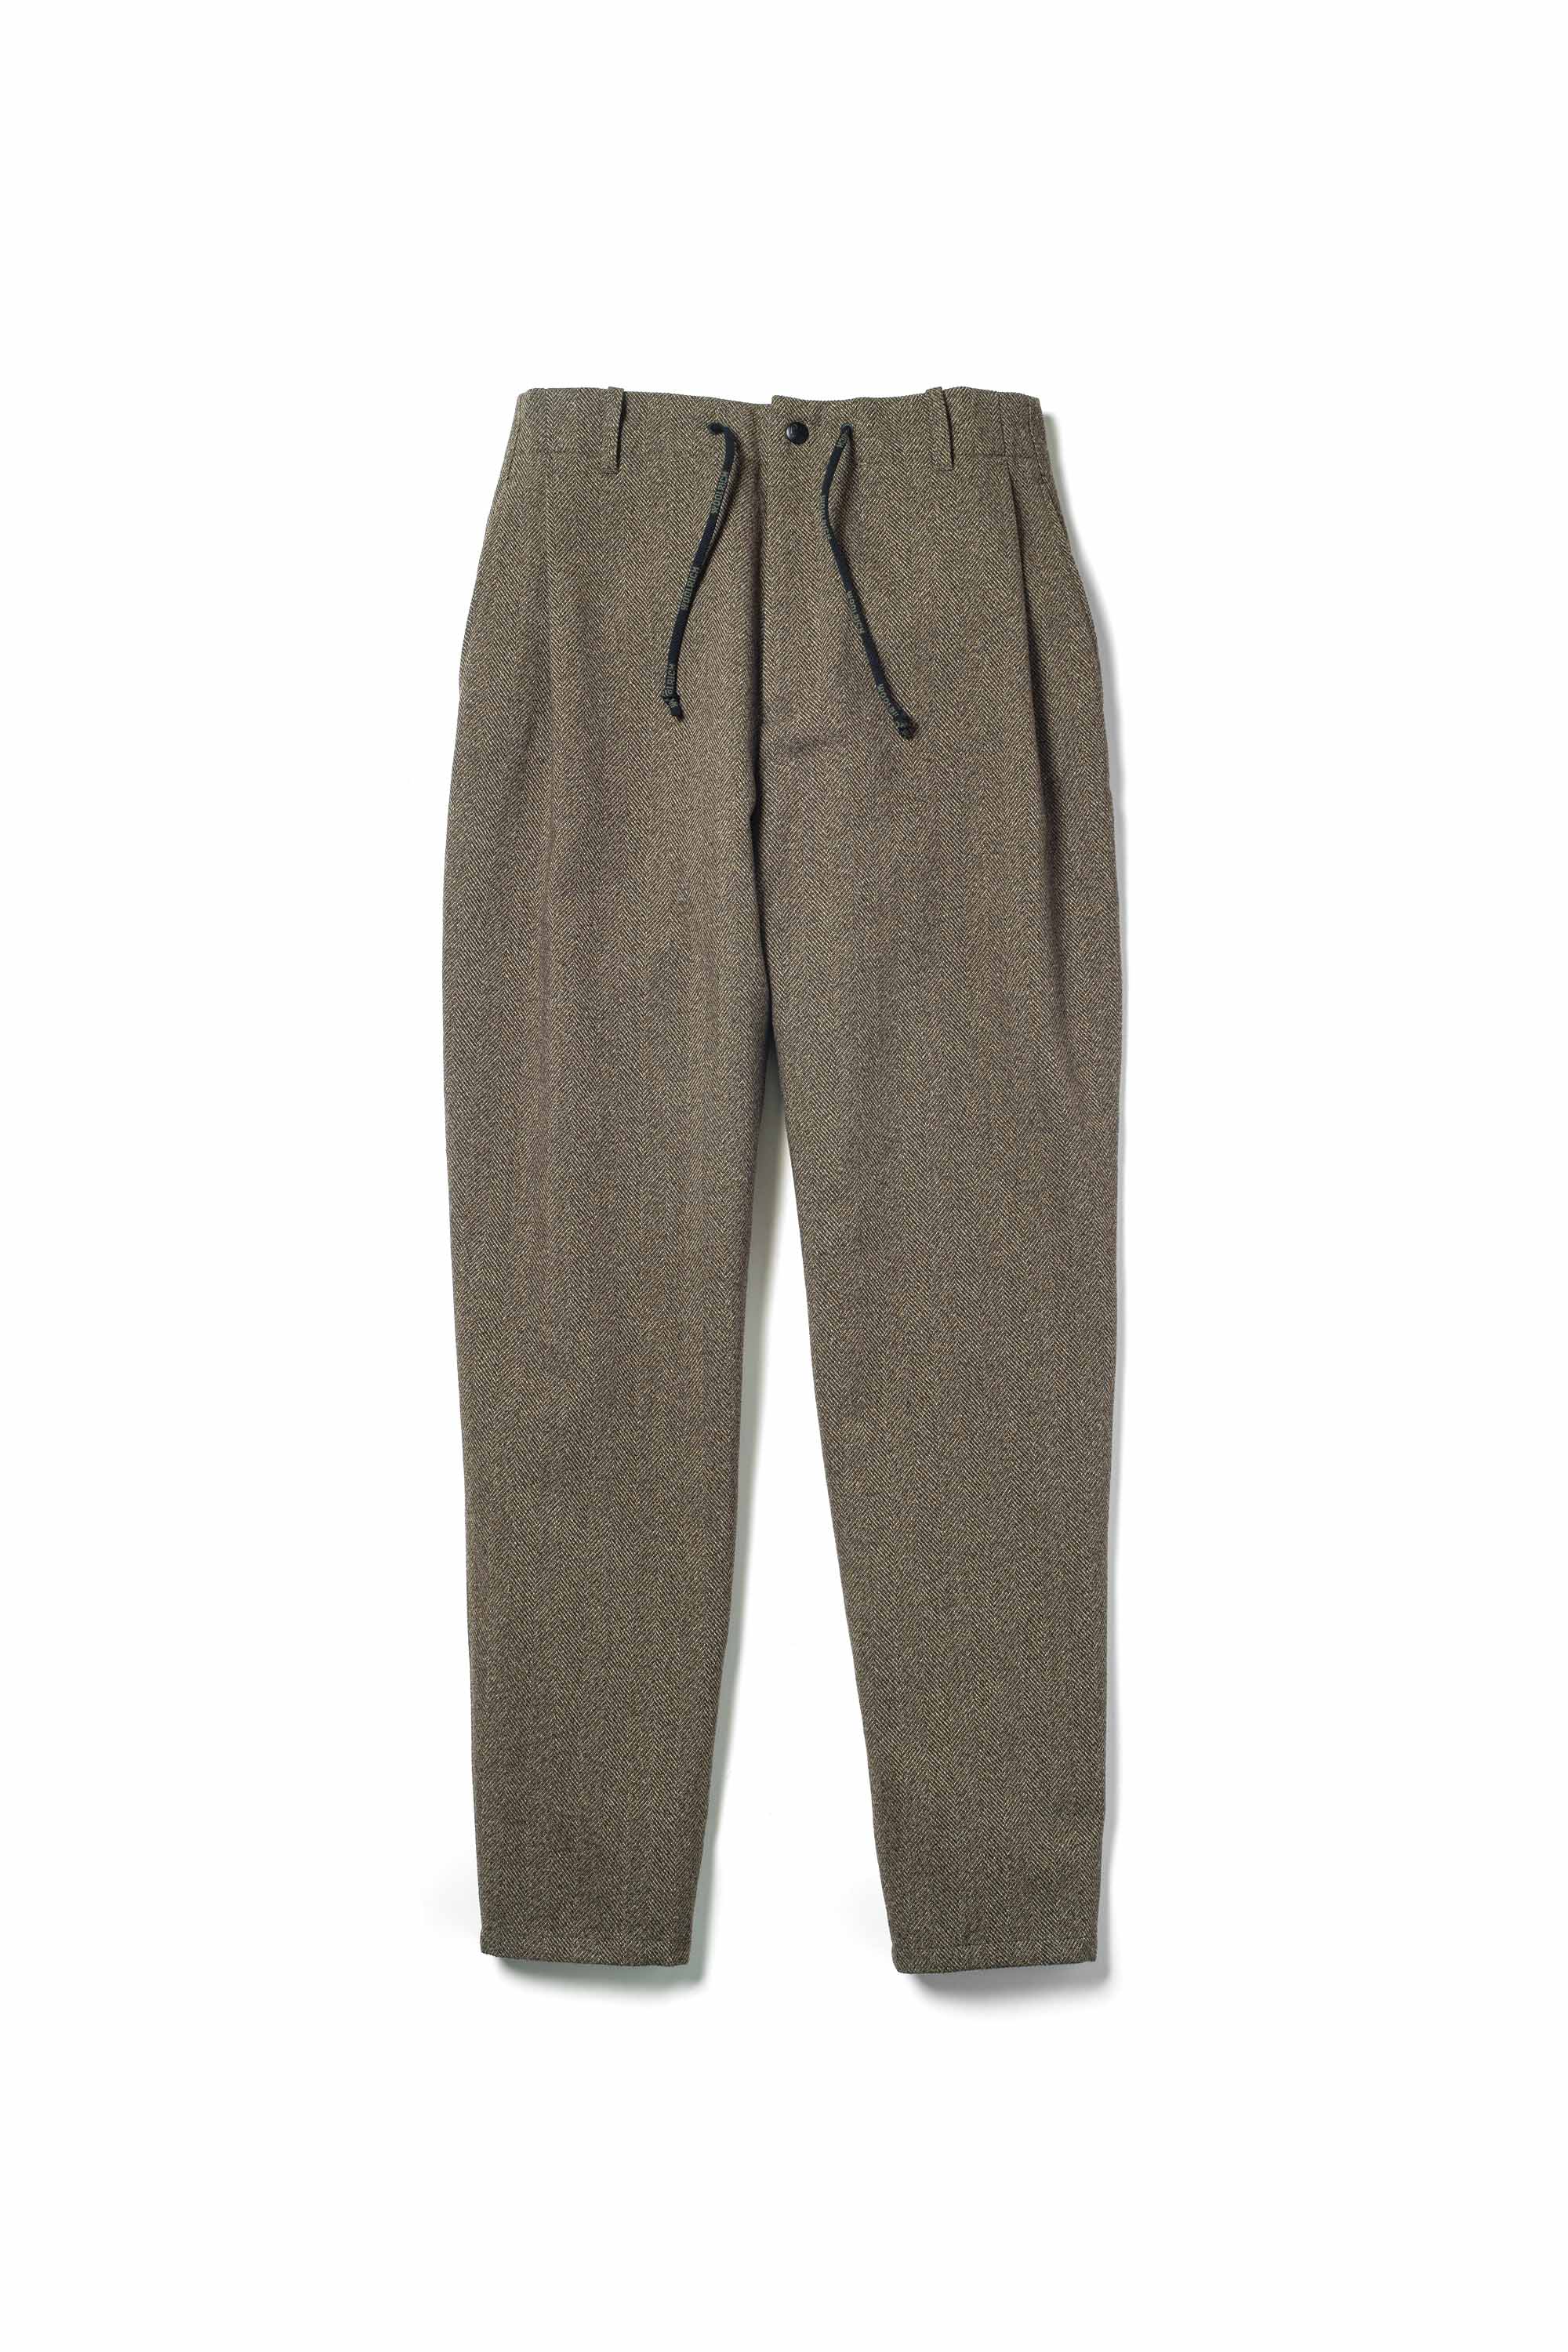 WARM RELAX PANTS